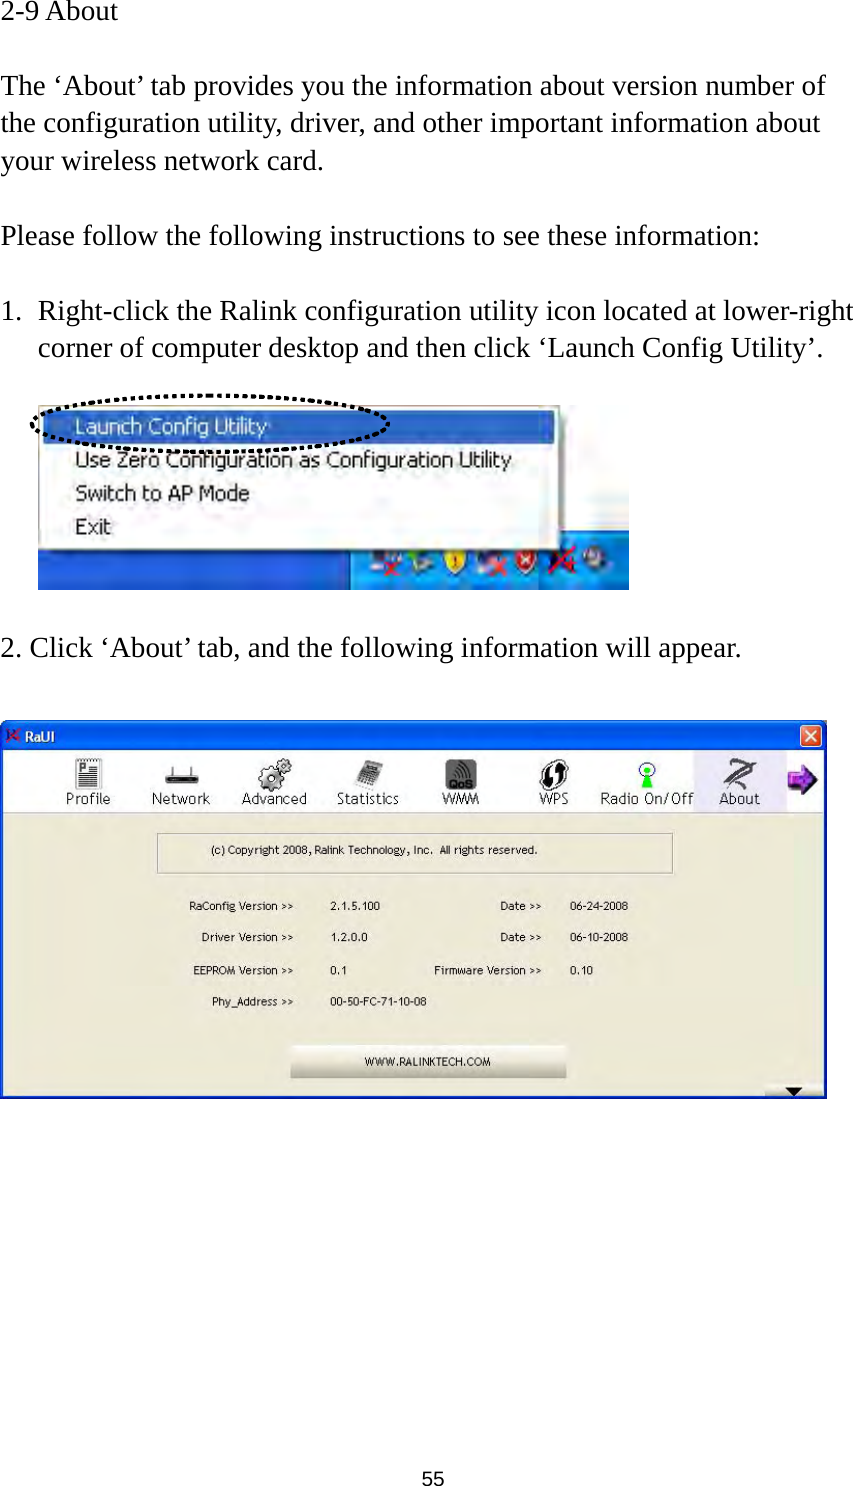  55 2-9 About  The ‘About’ tab provides you the information about version number of the configuration utility, driver, and other important information about your wireless network card.  Please follow the following instructions to see these information:  1. Right-click the Ralink configuration utility icon located at lower-right corner of computer desktop and then click ‘Launch Config Utility’.    2. Click ‘About’ tab, and the following information will appear.   